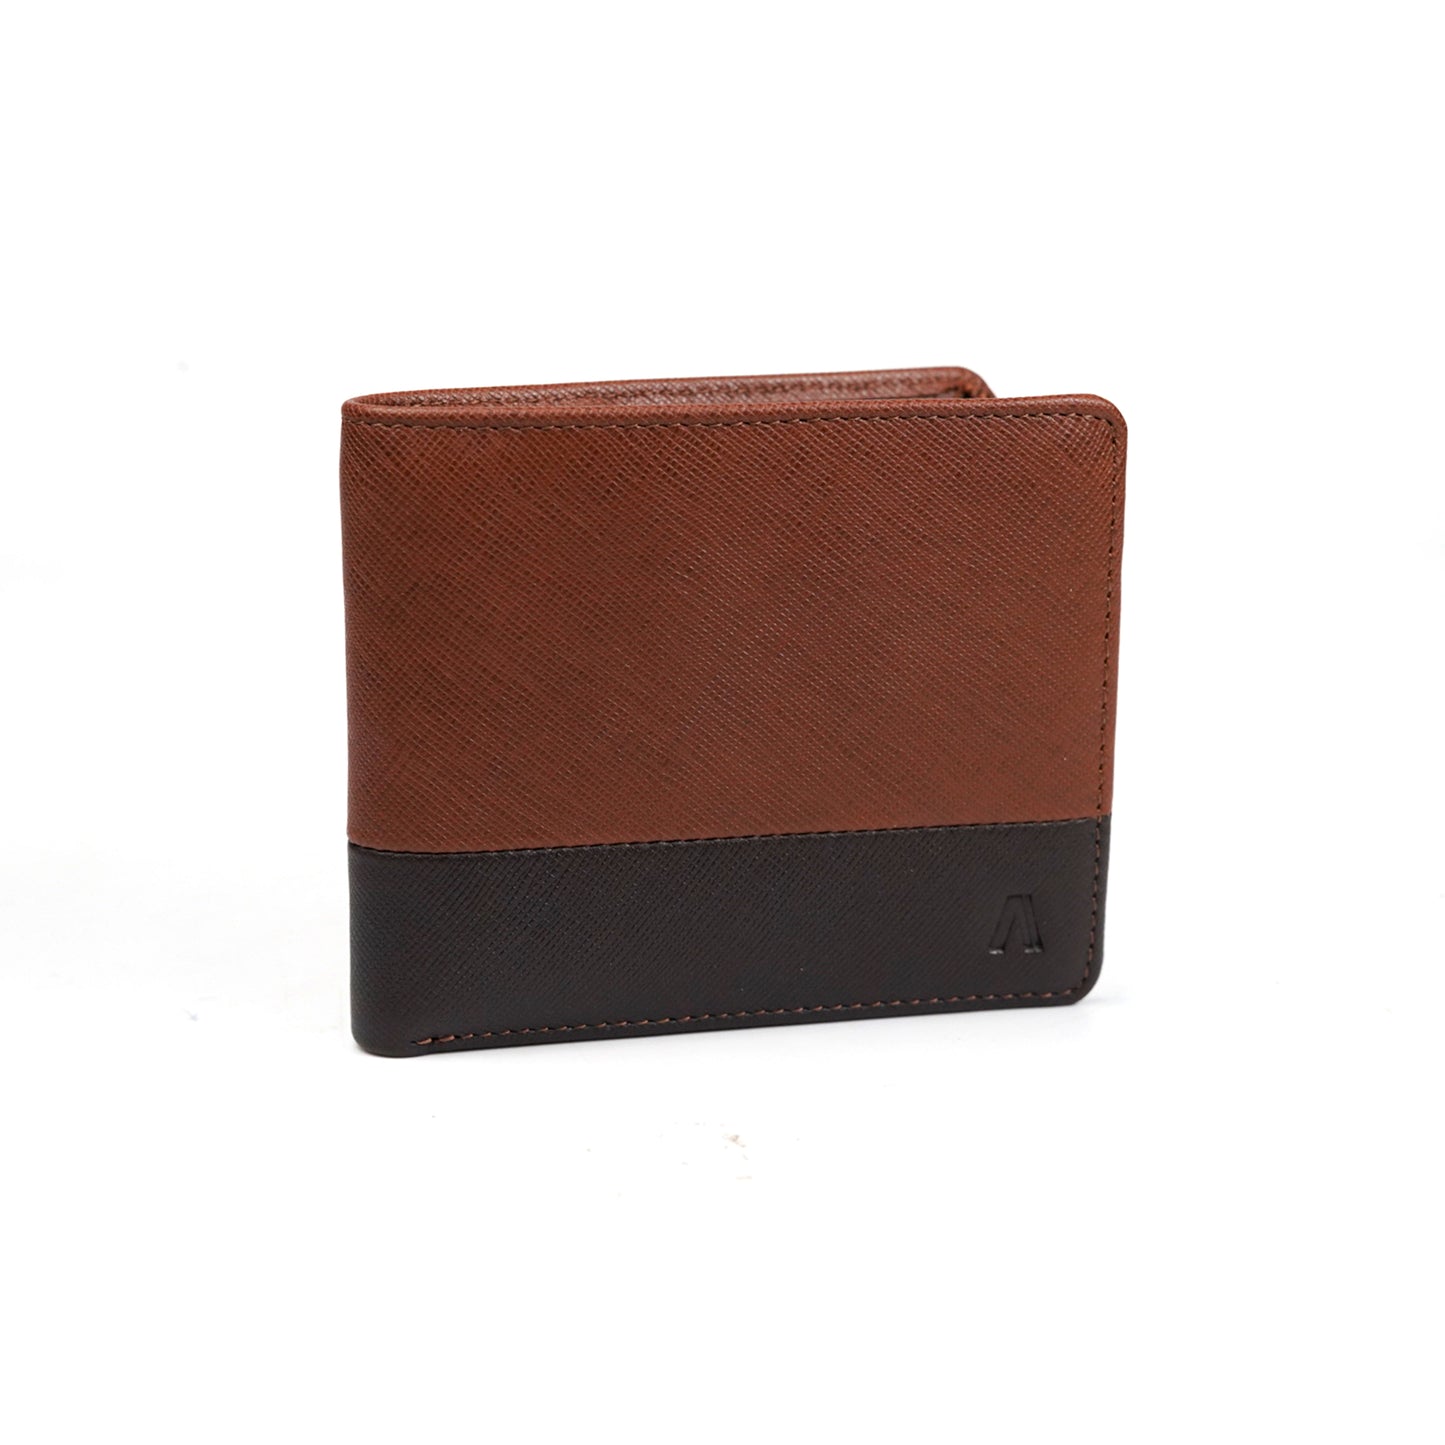 Alef Tokyo Men's Bifold Leather Wallet with Centre Flap and Card Window (Brown/Cafe)